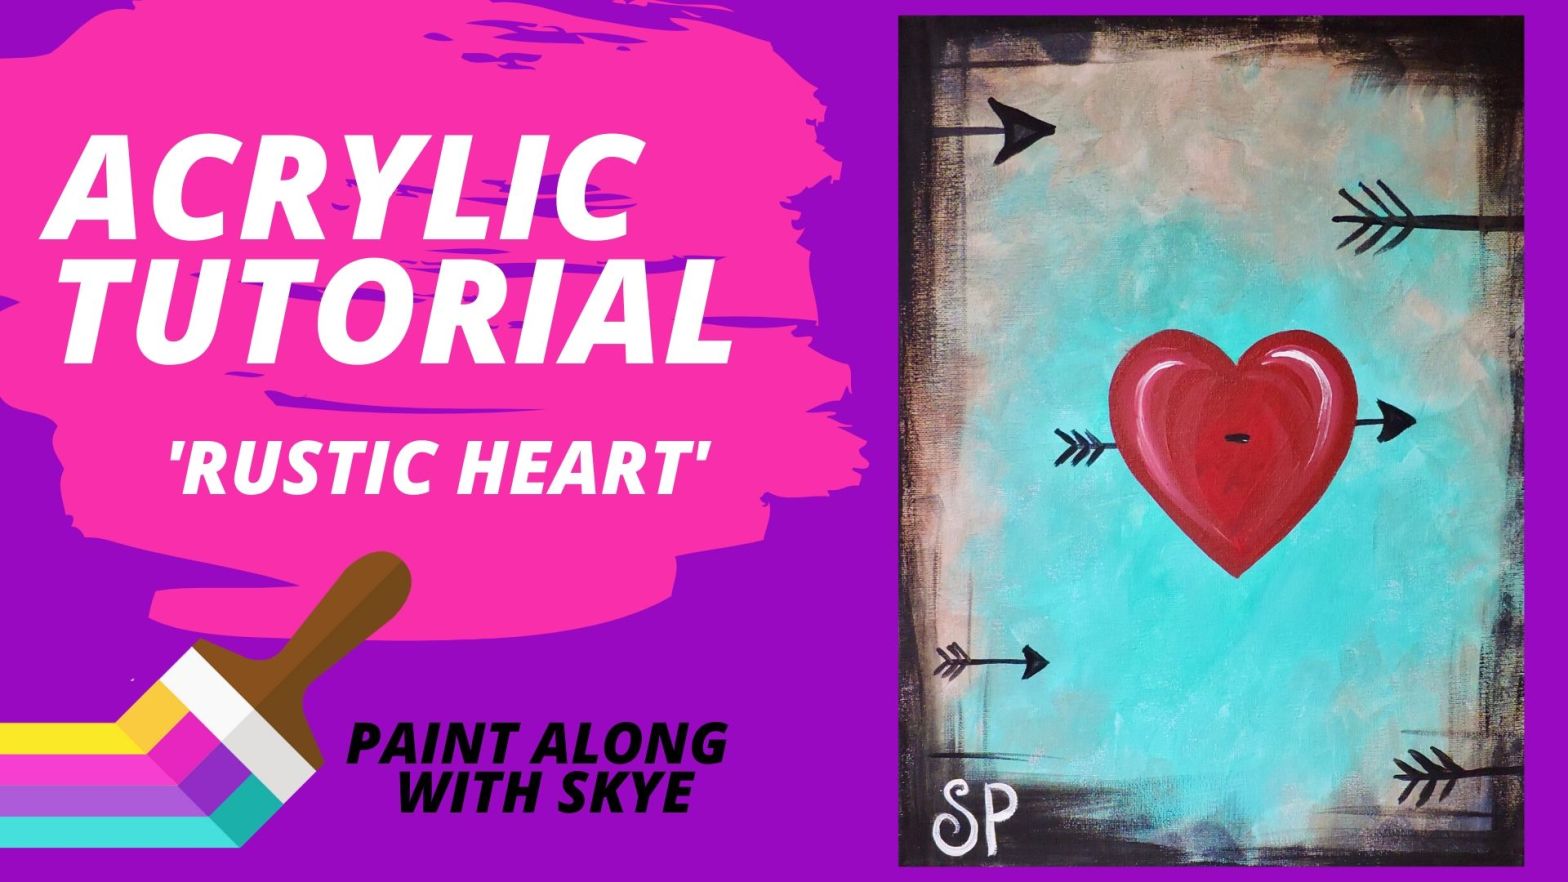 Tagged: How To Paint With Acrylics For Beginners